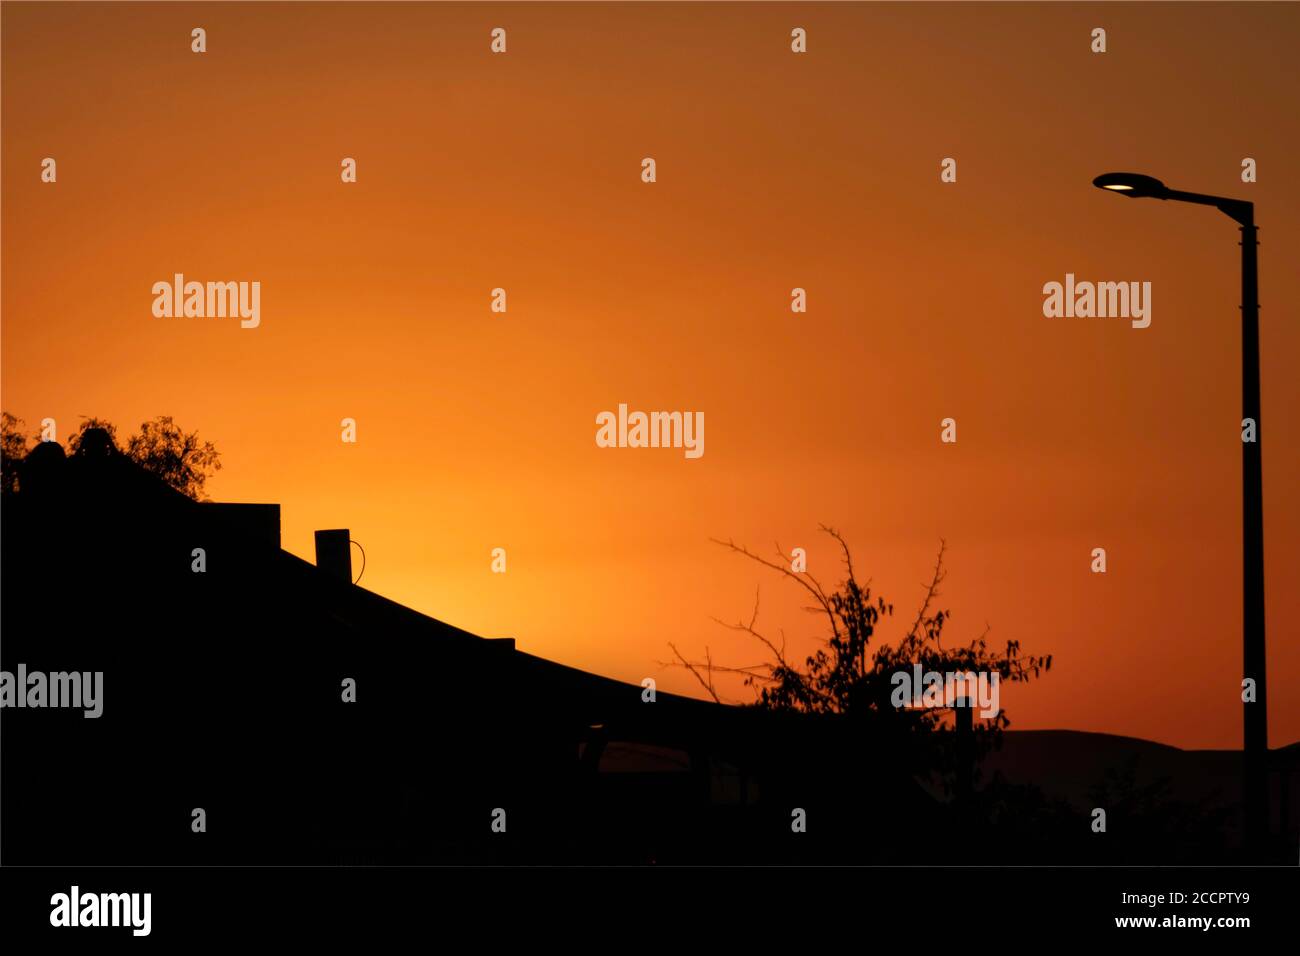 Silhouettes of the houses and trees on the background of the colorful sunset sky Stock Photo